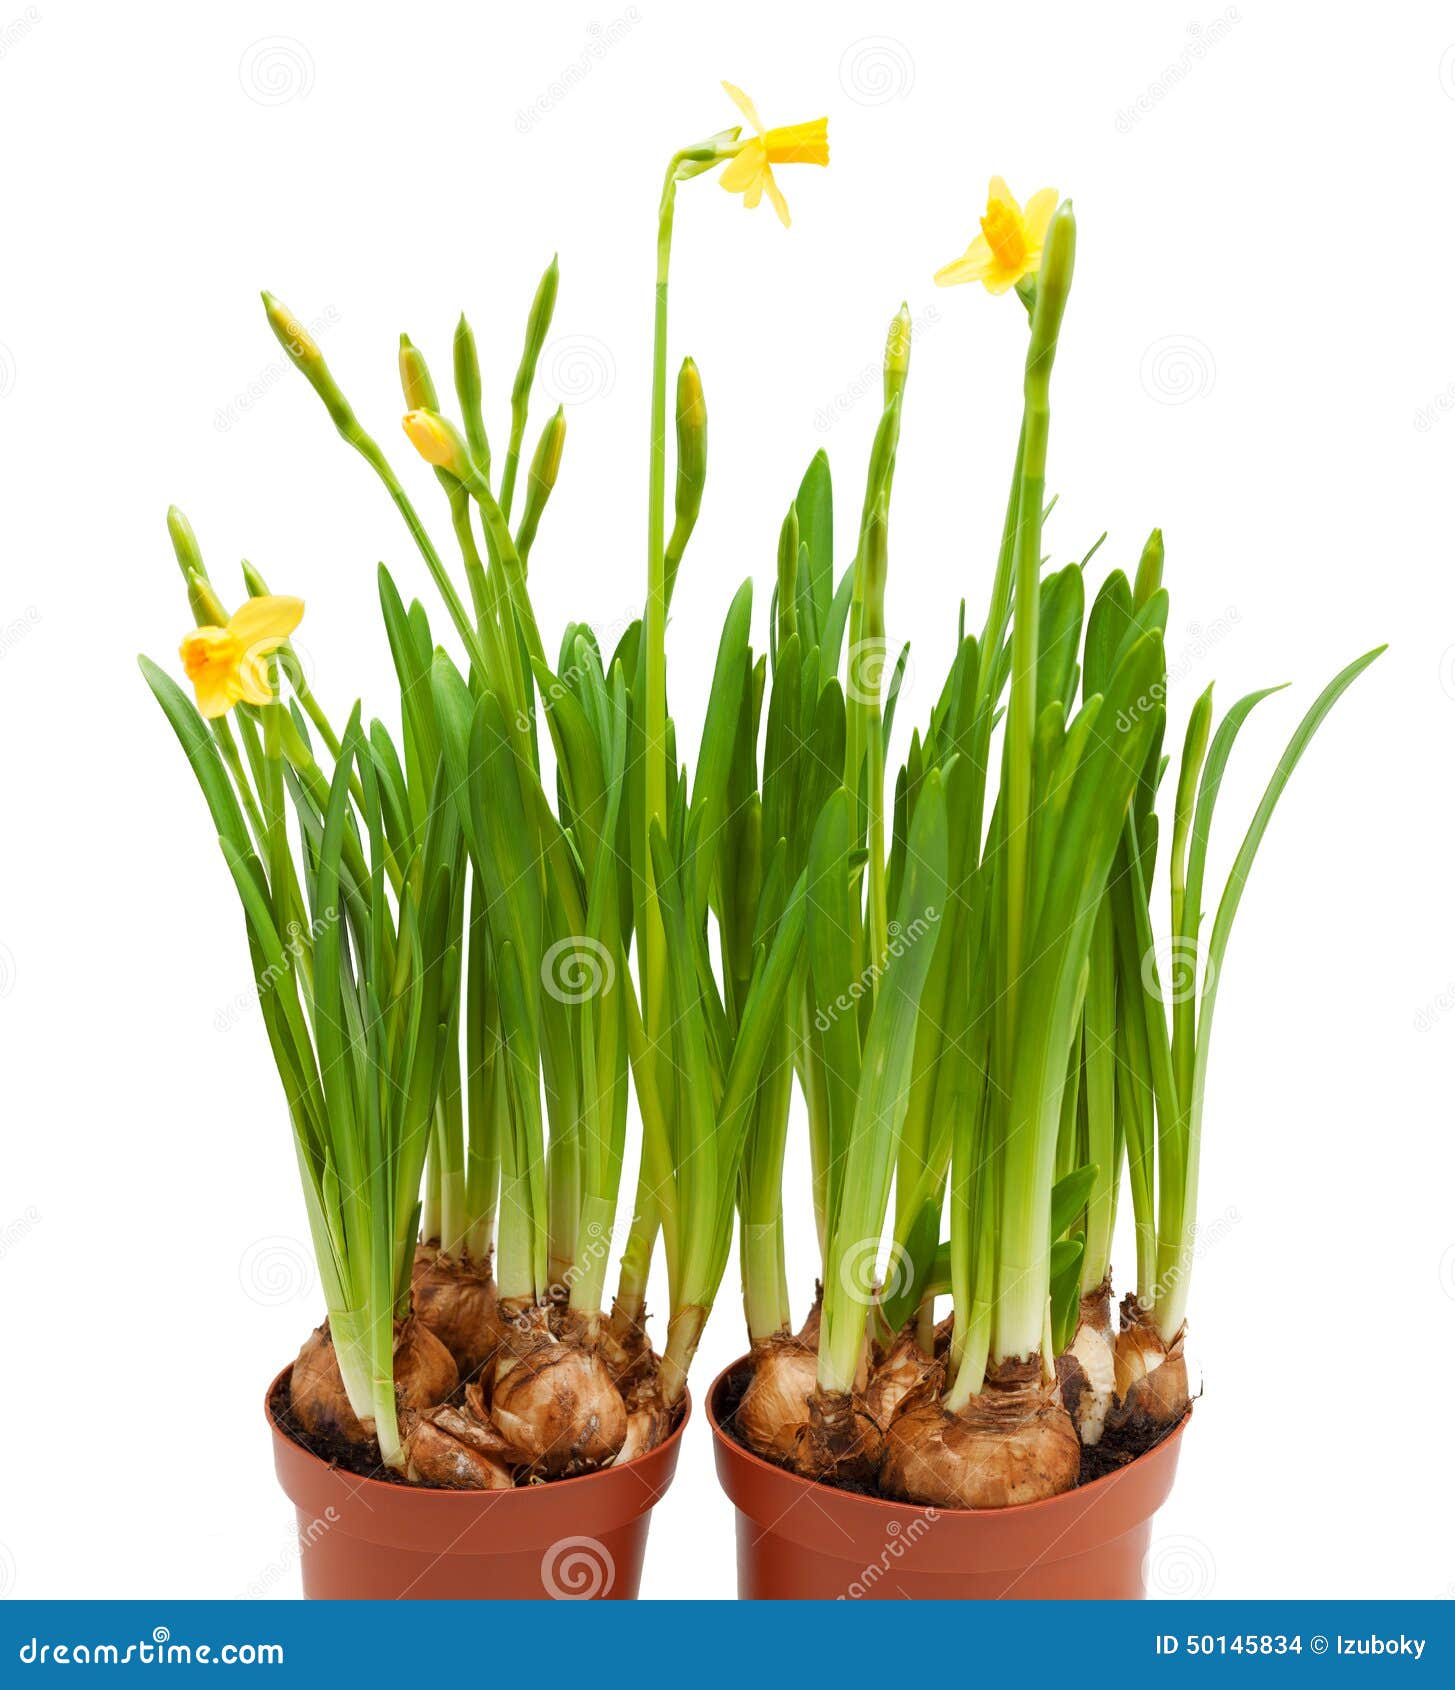 Potted Daffodil Flowers Grow Pots Isolated Stock Photo - Image of green ...